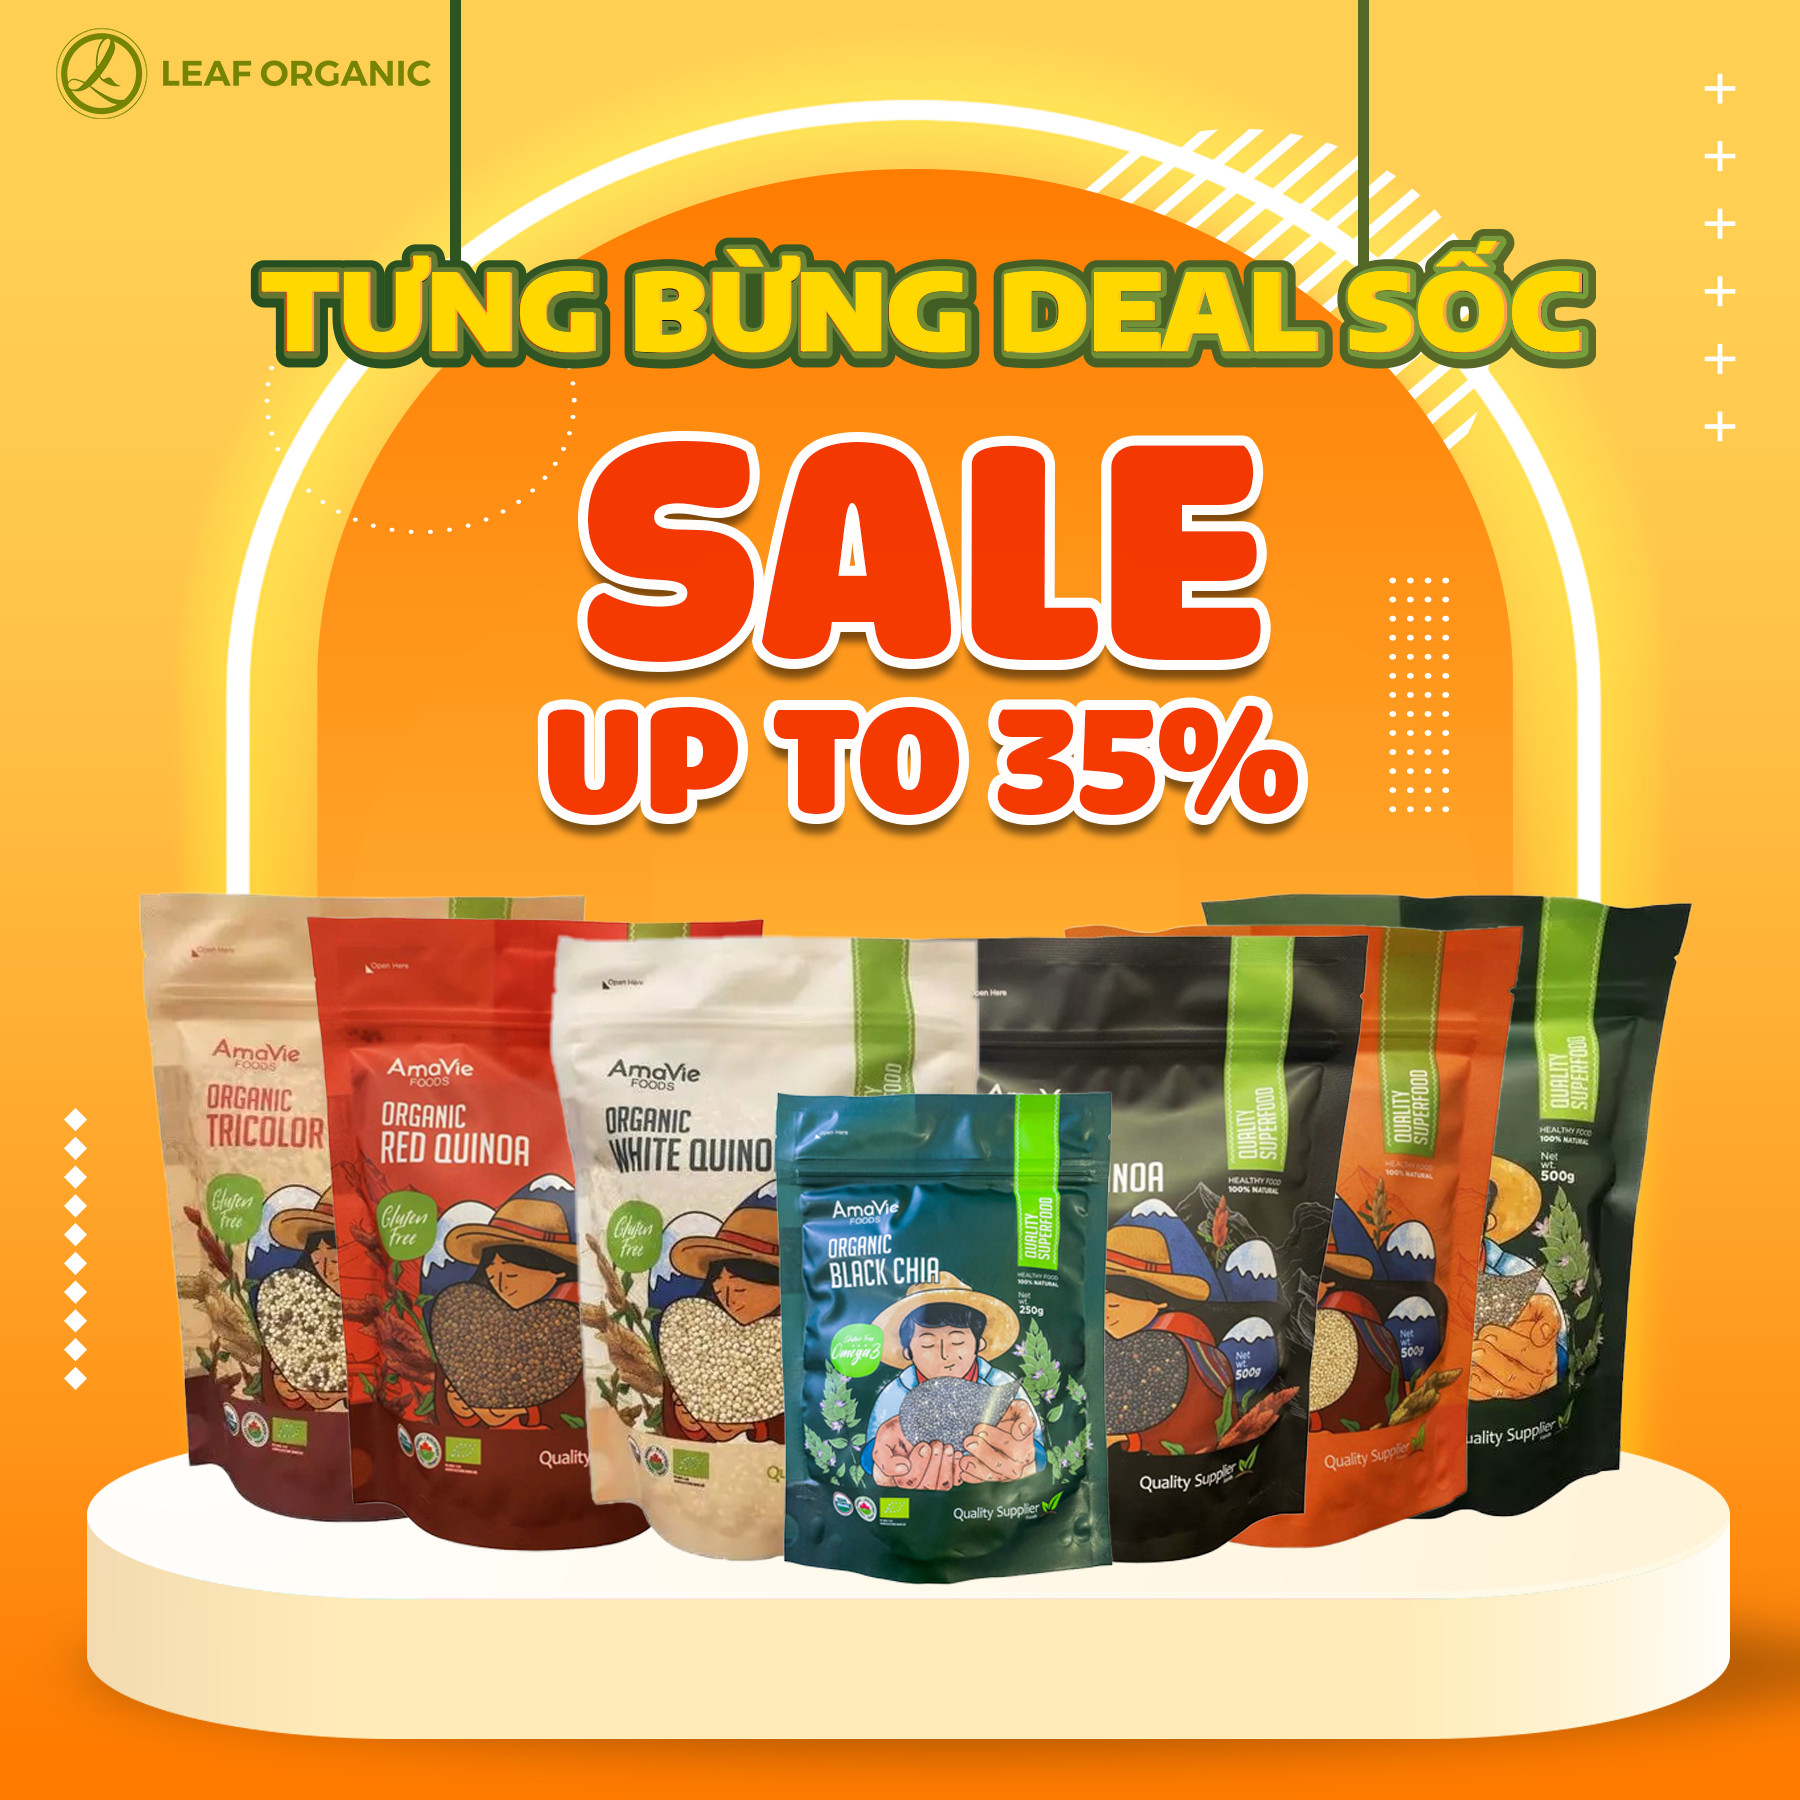 TƯNG BỪNG DEAL SỐC